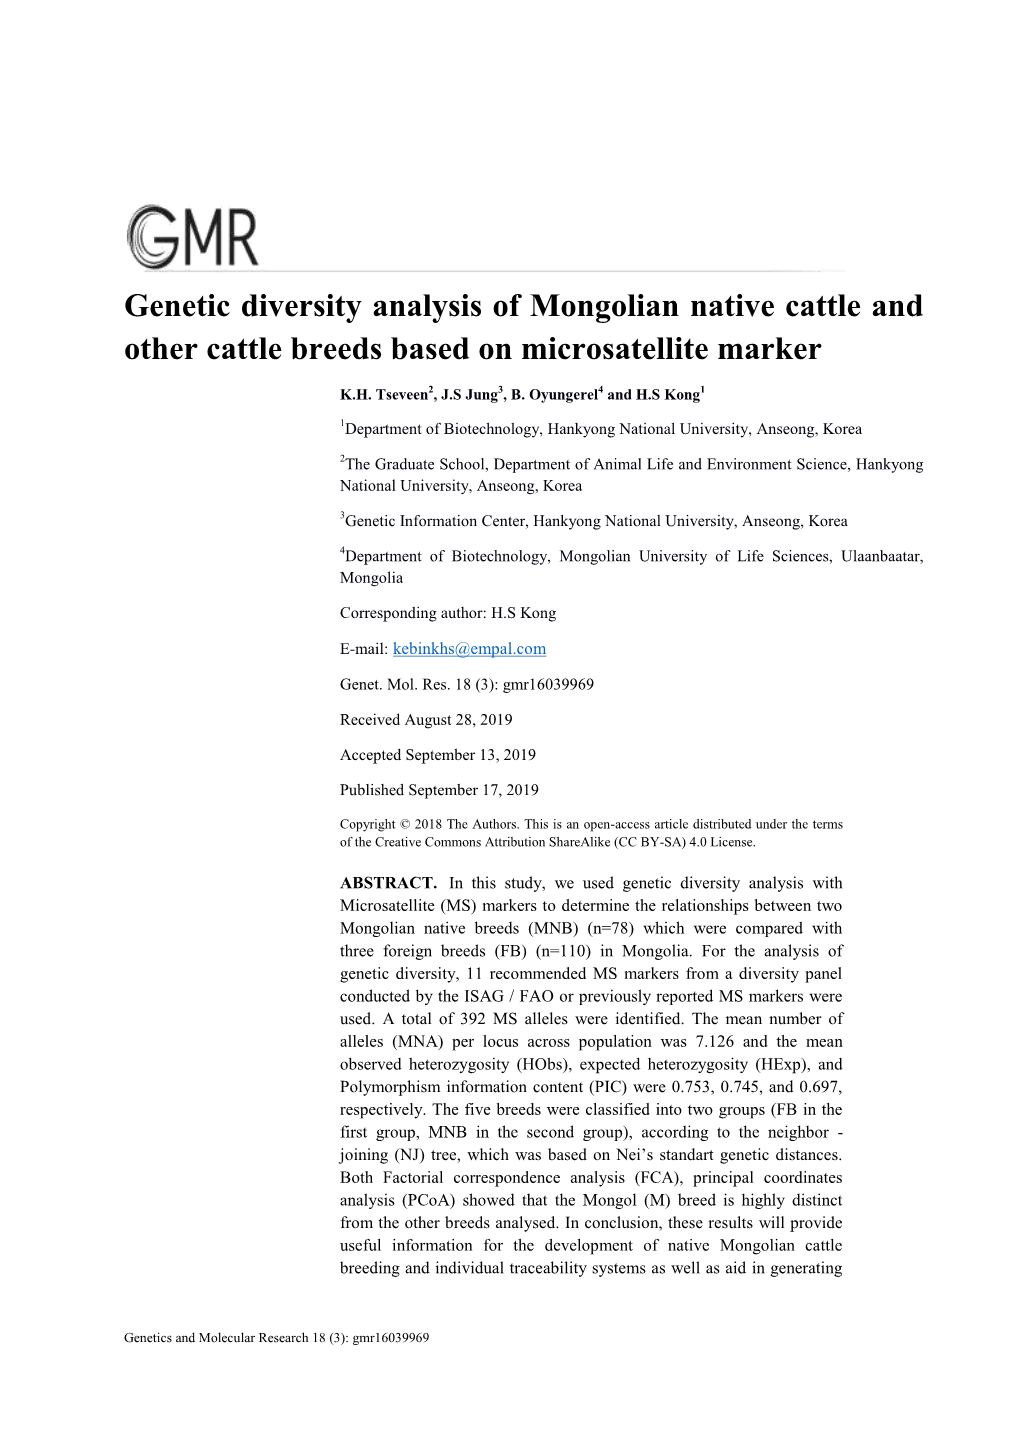 Genetic Diversity Analysis of Mongolian Native Cattle and Other Cattle Breeds Based on Microsatellite Marker